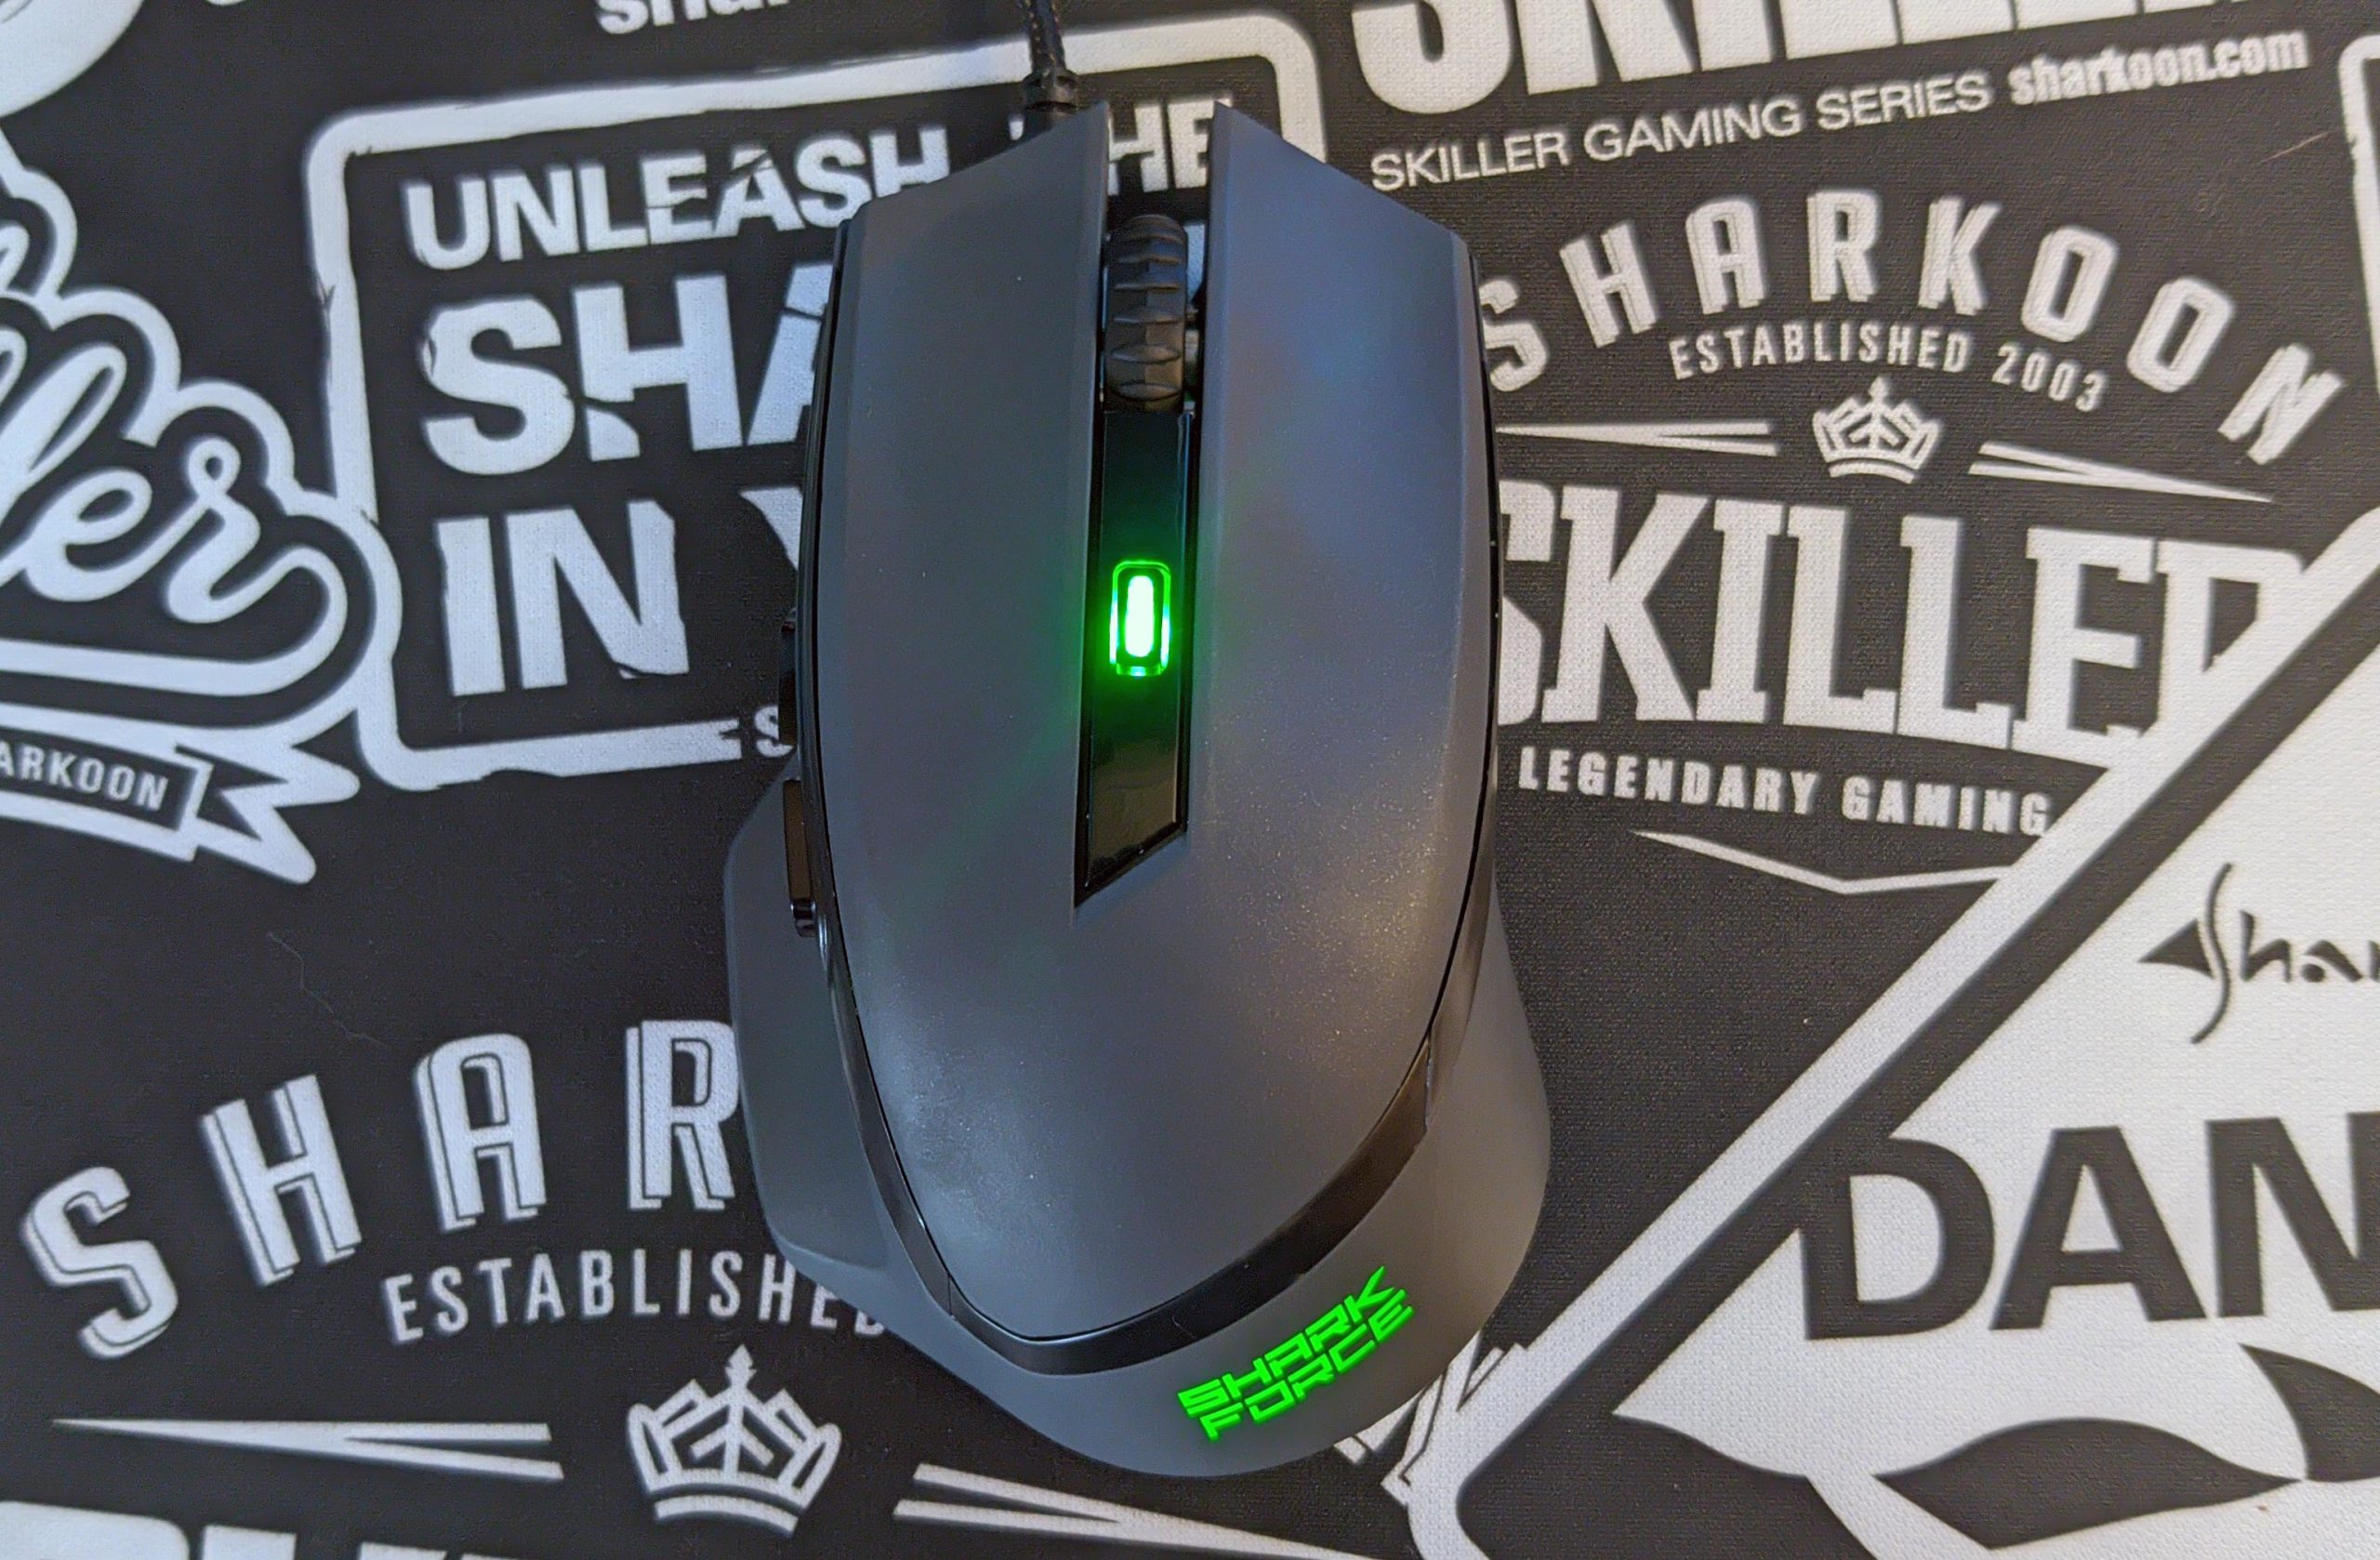 Sharkoon Shark Mouse II igor´sLAB or | Force Price inspector - Cheap just | Review Cheap? 9-Euro-Bargain